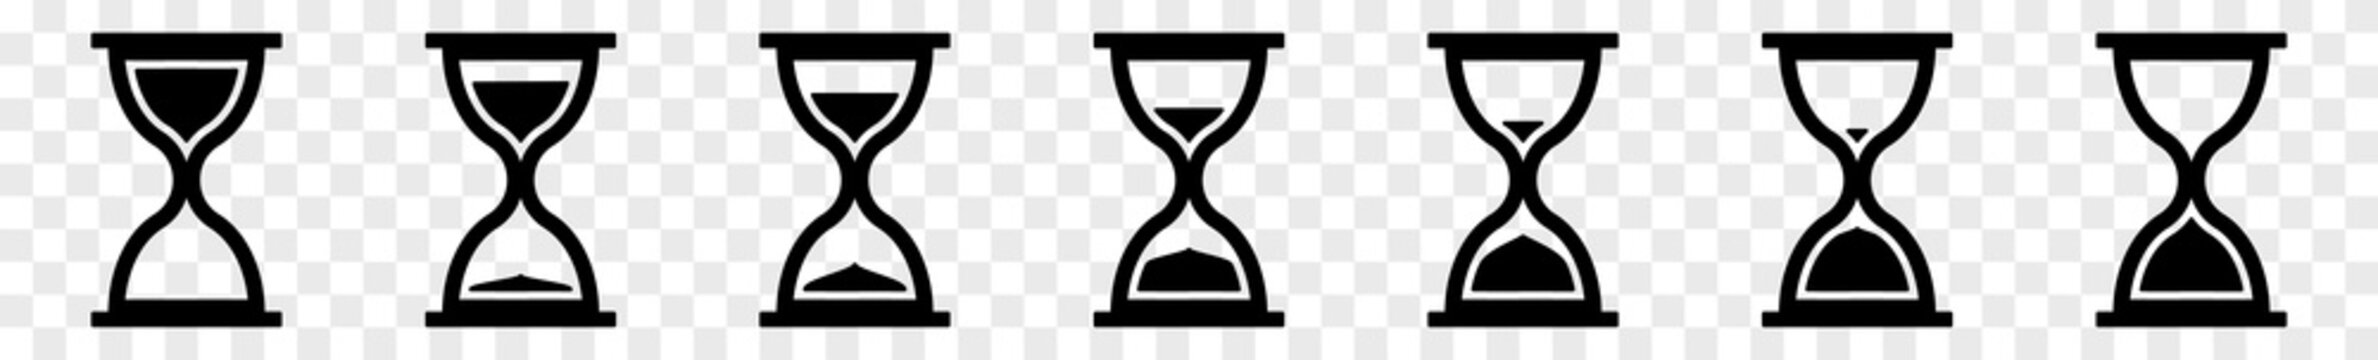 Hourglass Icon Black | Hourglasses | Time Symbol | Sandglass Logo | Clock Sign | Timer | Isolated Transparent | Variations